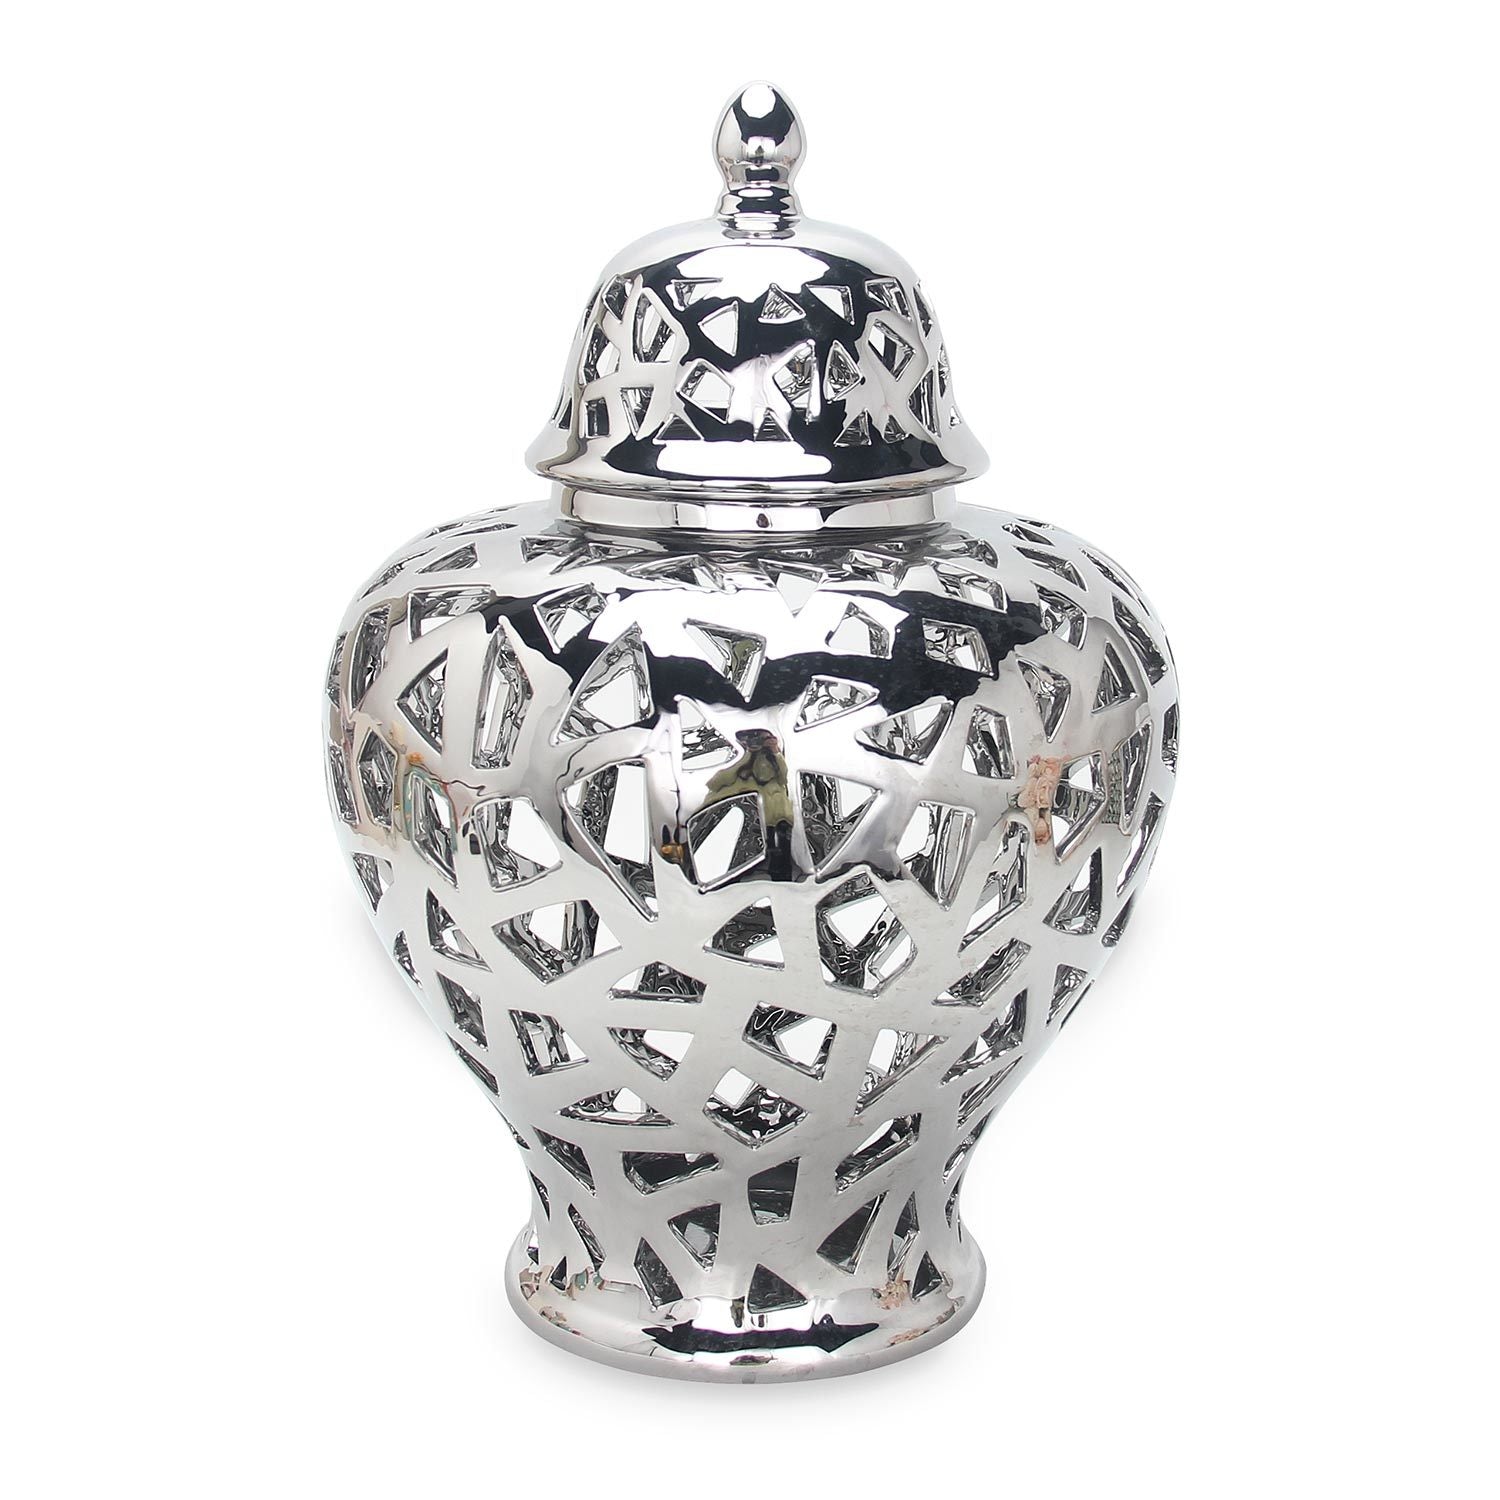 A decorative object, the Silver Ceramic Ginger Jar Vase with Decorative Design adds an element of decor style to any space.